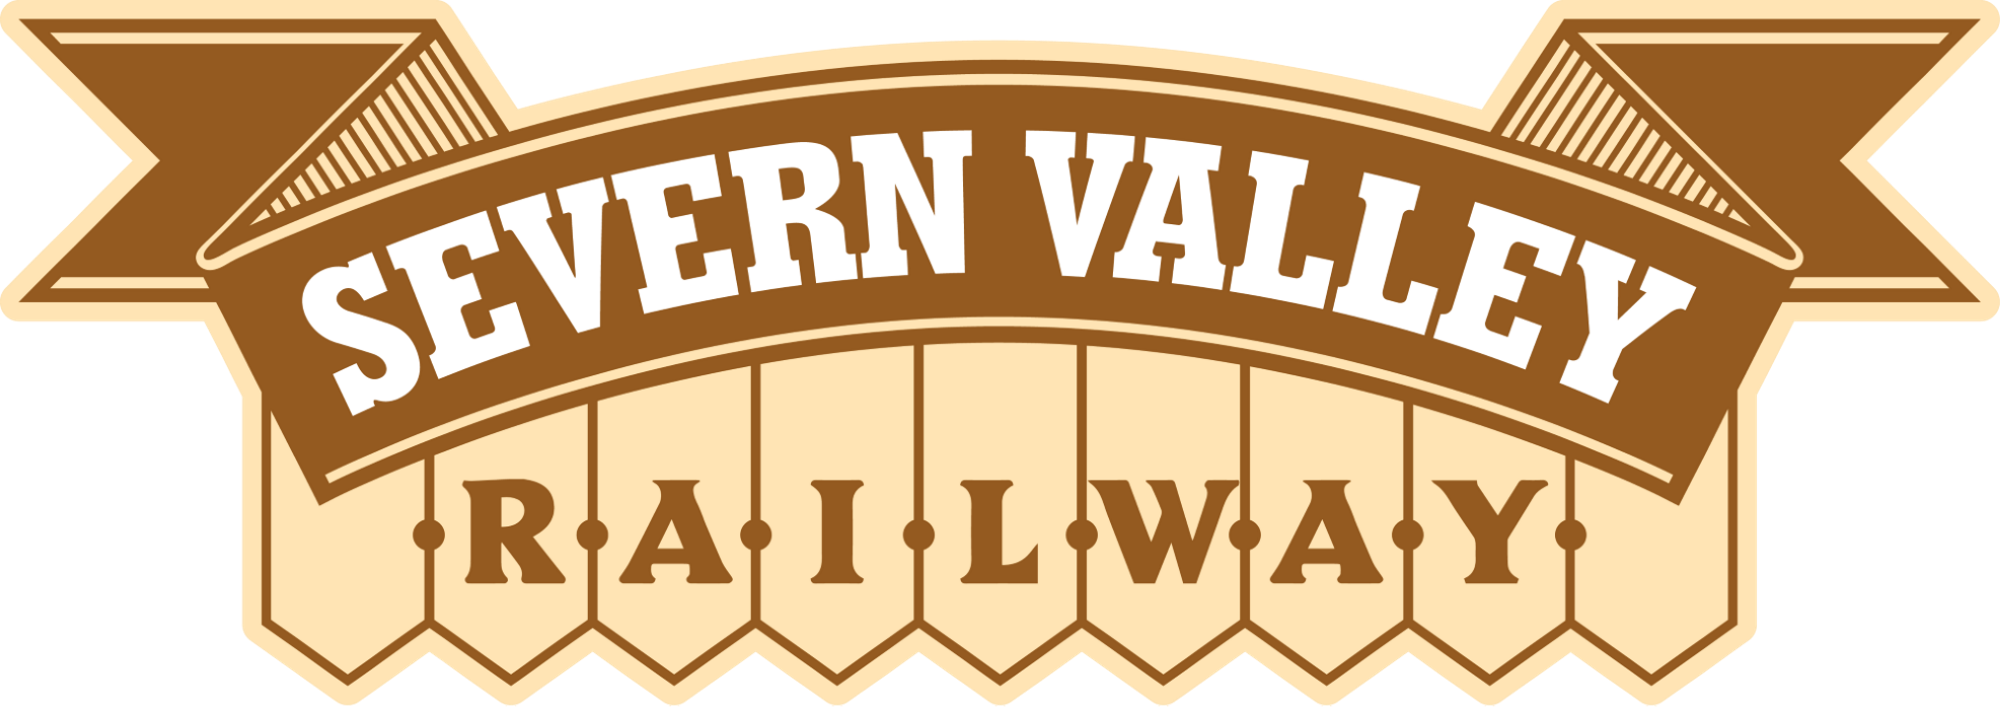 severn_valley_logo.png